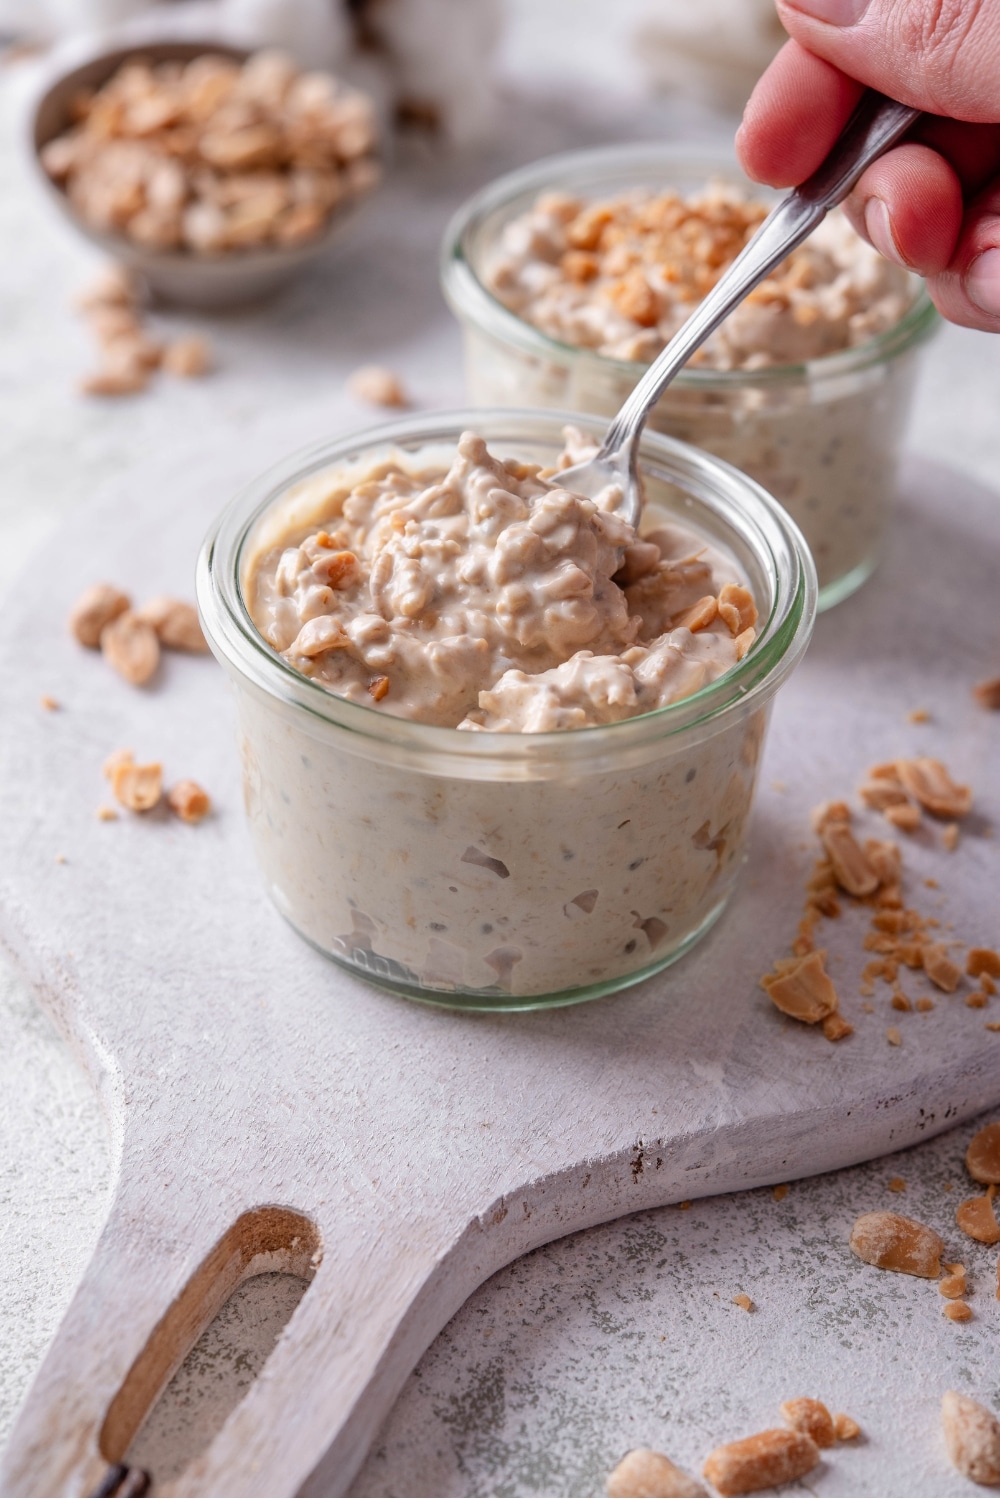 A small glass jar filled with peanut butter overnight oats on top of a wooden serving board with peanuts sprinkled around it. There is a hand dipping a spoon into the jar.